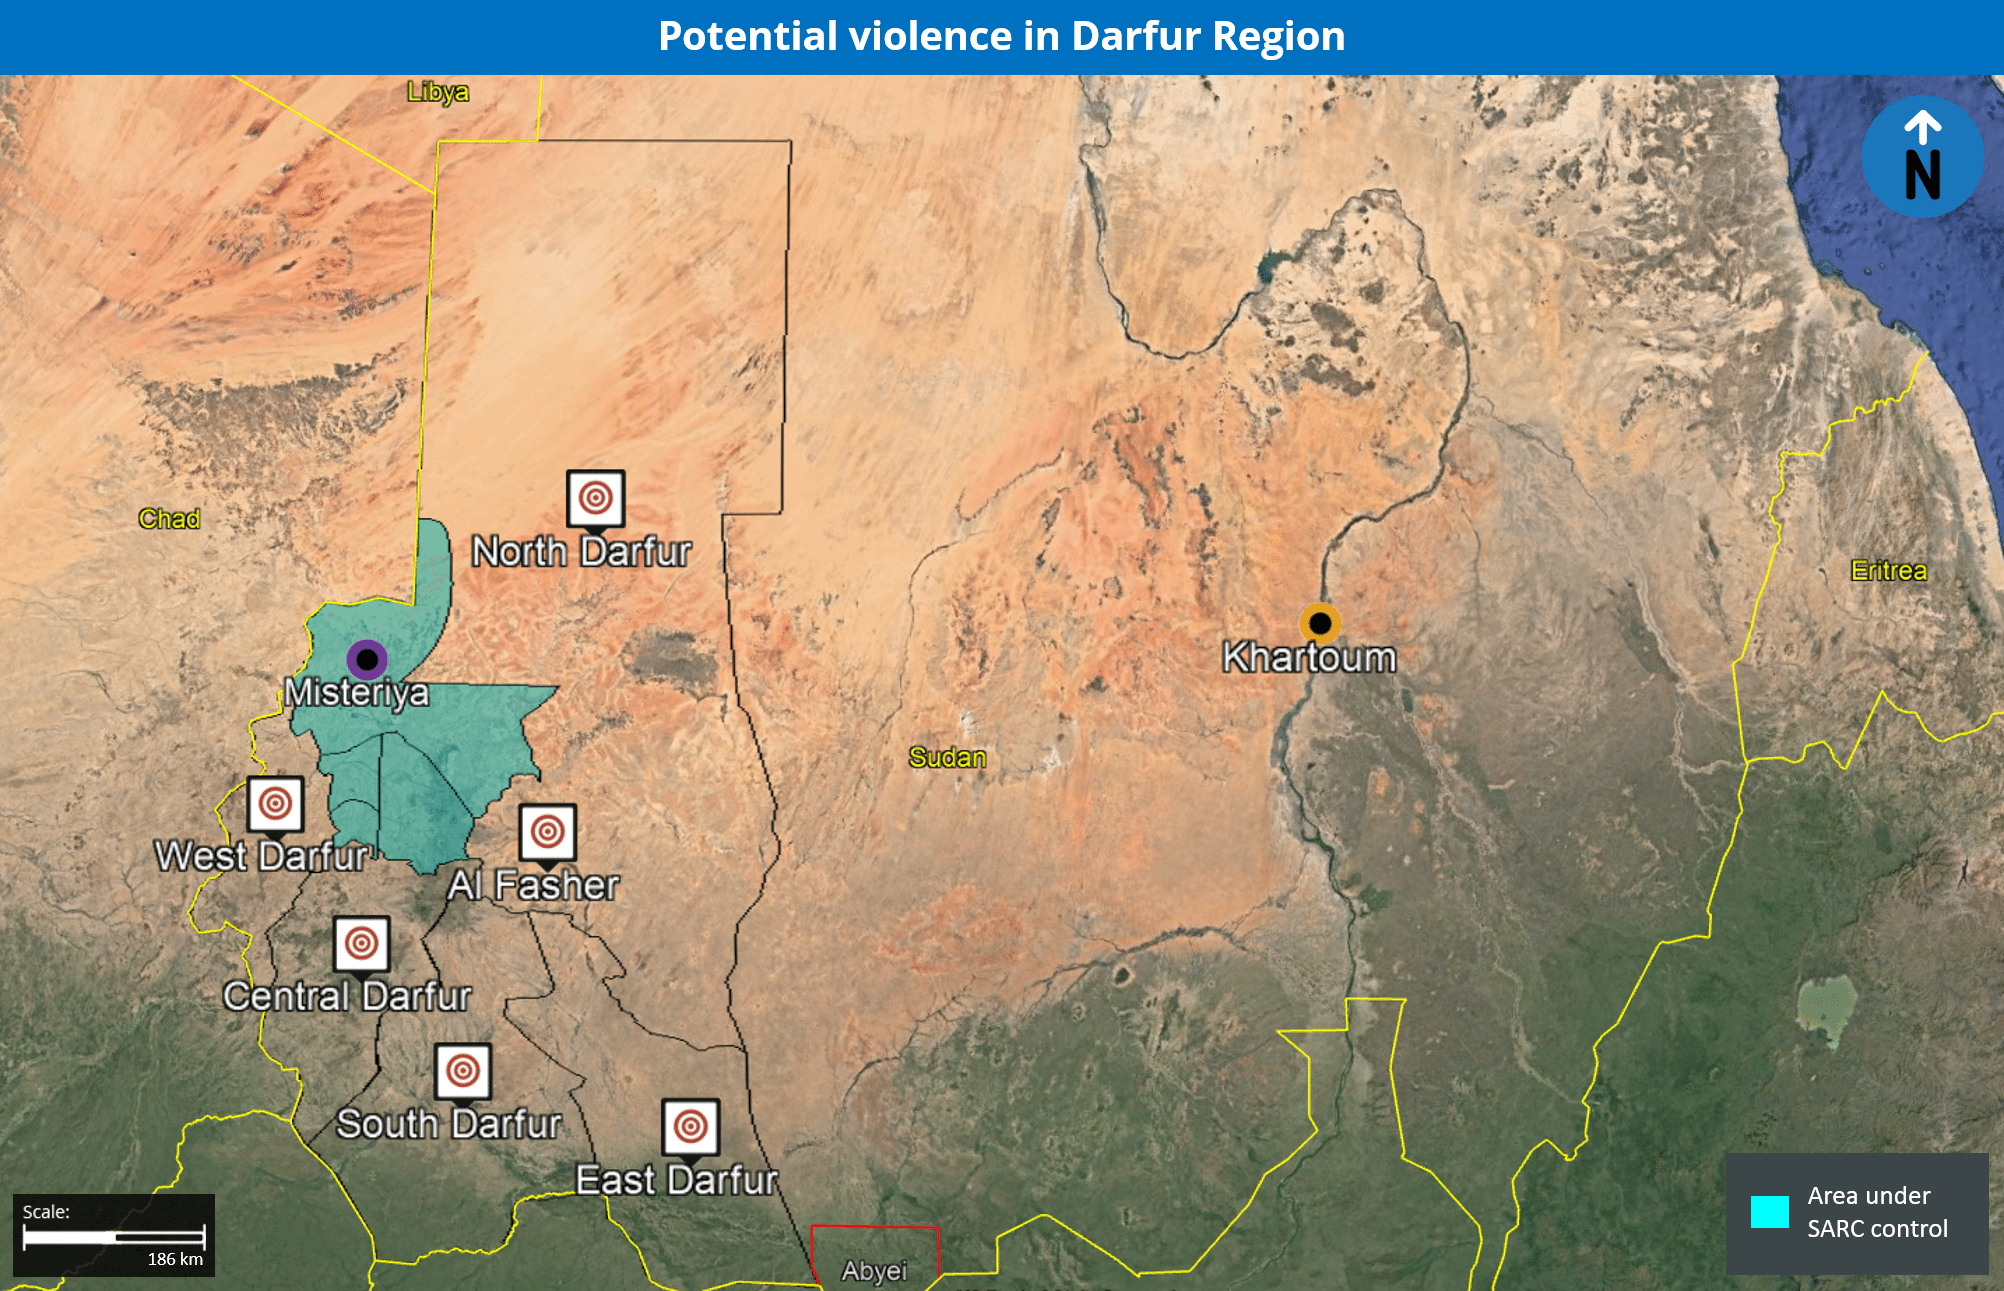 Recent developments in Darfur highlight Sudan’s security dilemma of past armament of local militias; local escalation of conflict likely - Sudan Special Analysis | MAX Security